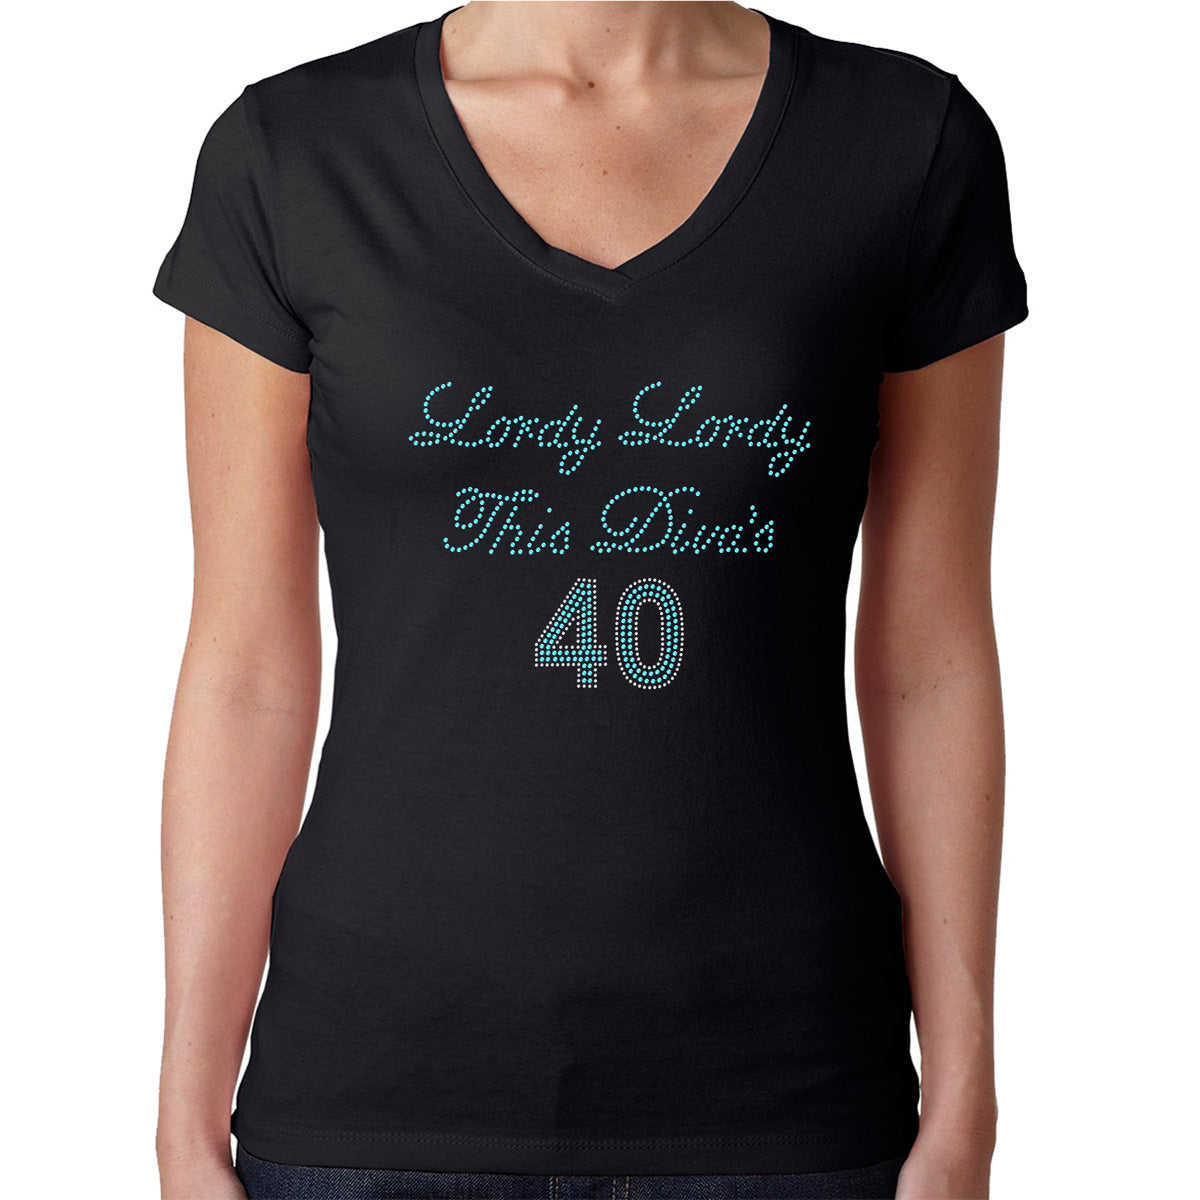 Womens T-Shirt Rhinestone Bling Black Fitted Tee Lordy This Divas 40 Forty